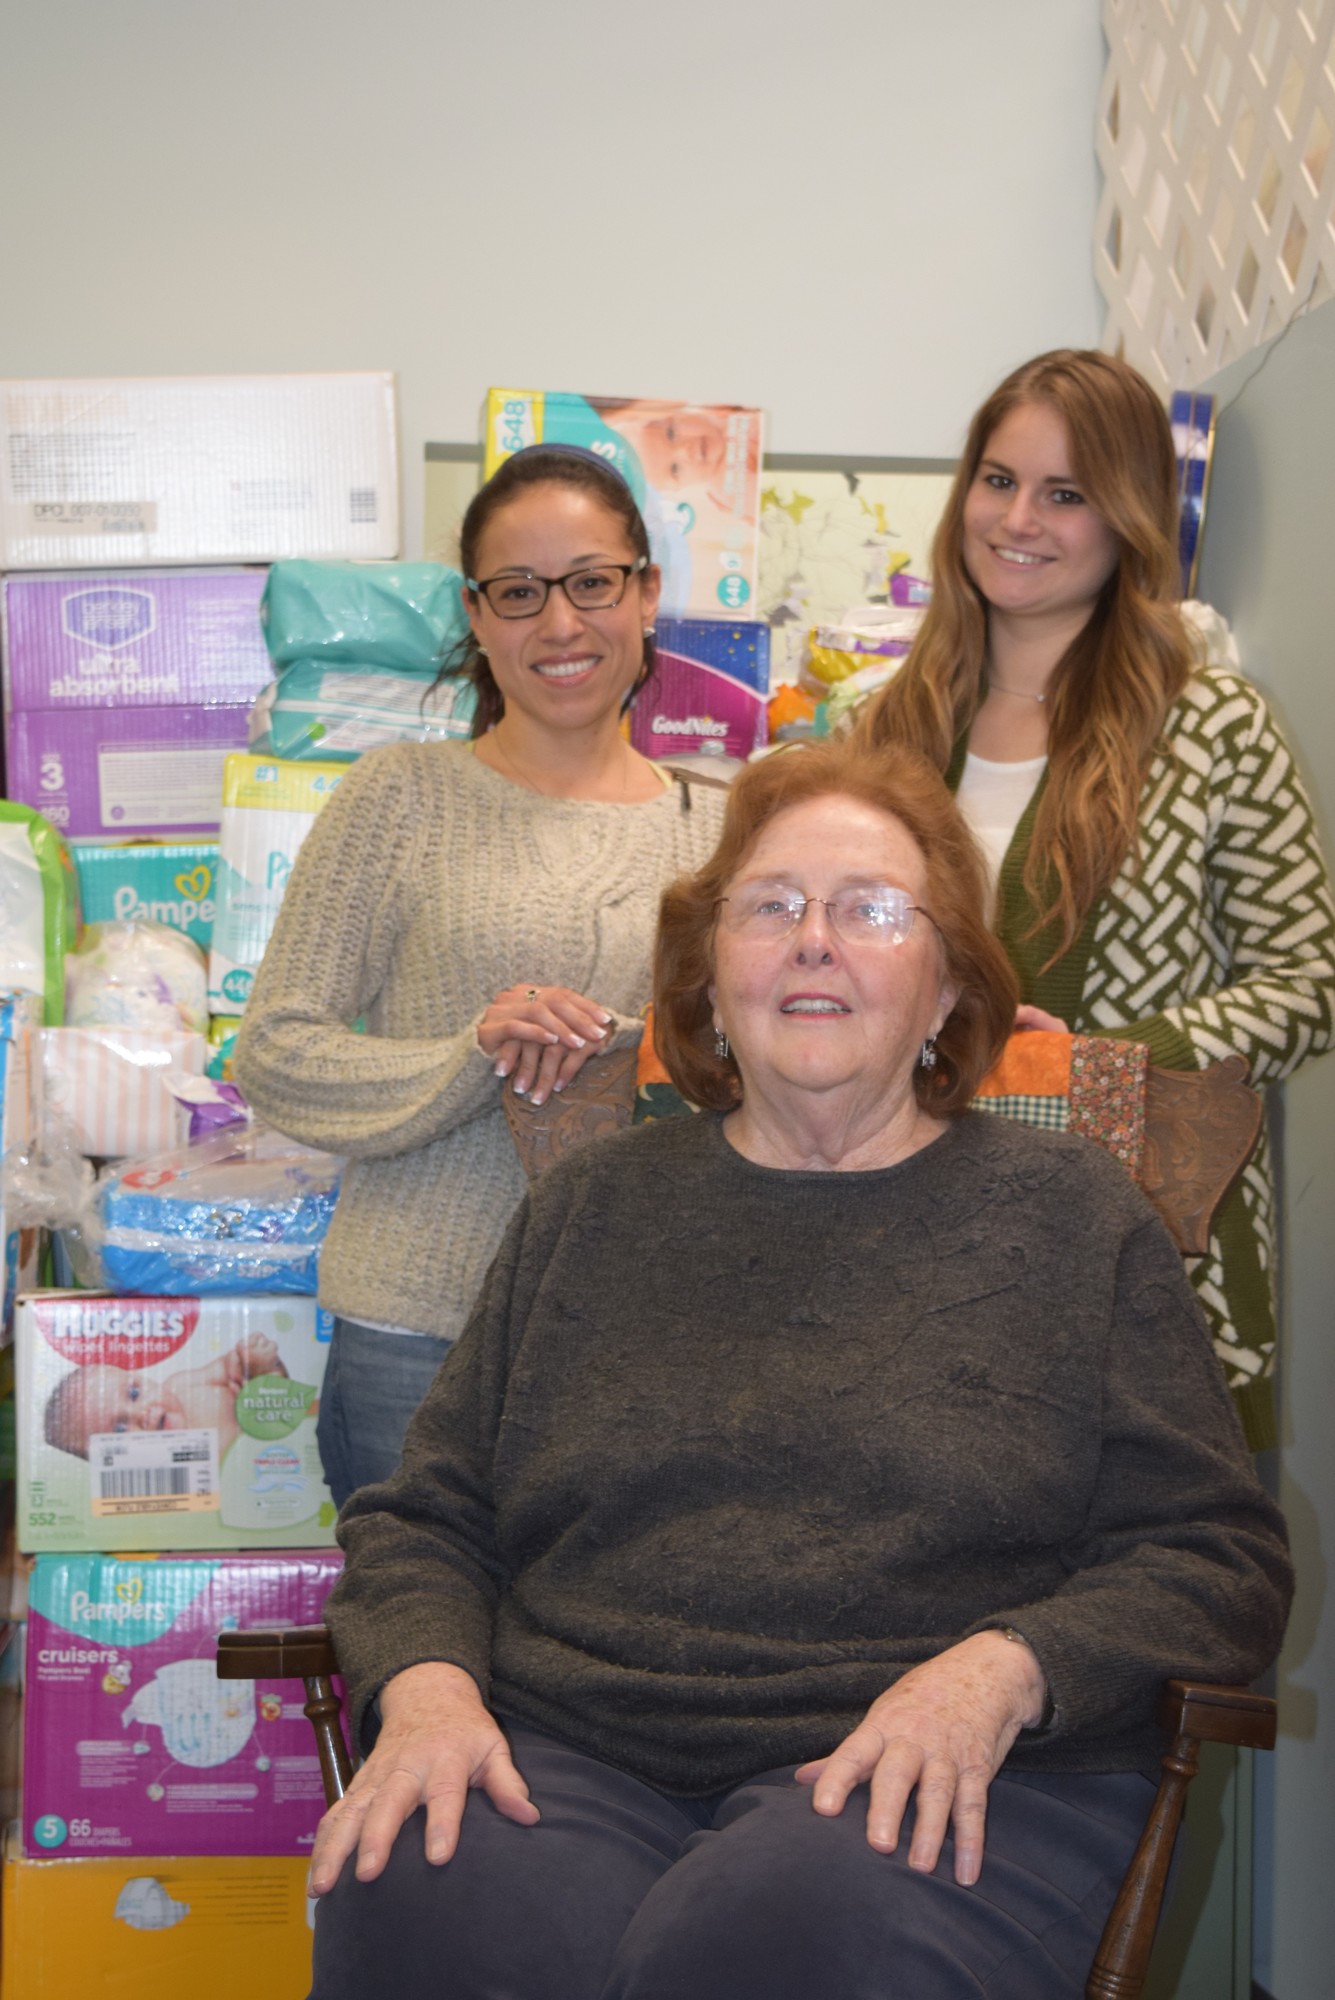 Director Patricia Shea and social workers Daniela Richards, left, and Ashley Loodus help young mothers relocate and become independent through the Mommas House nonprofit organization.